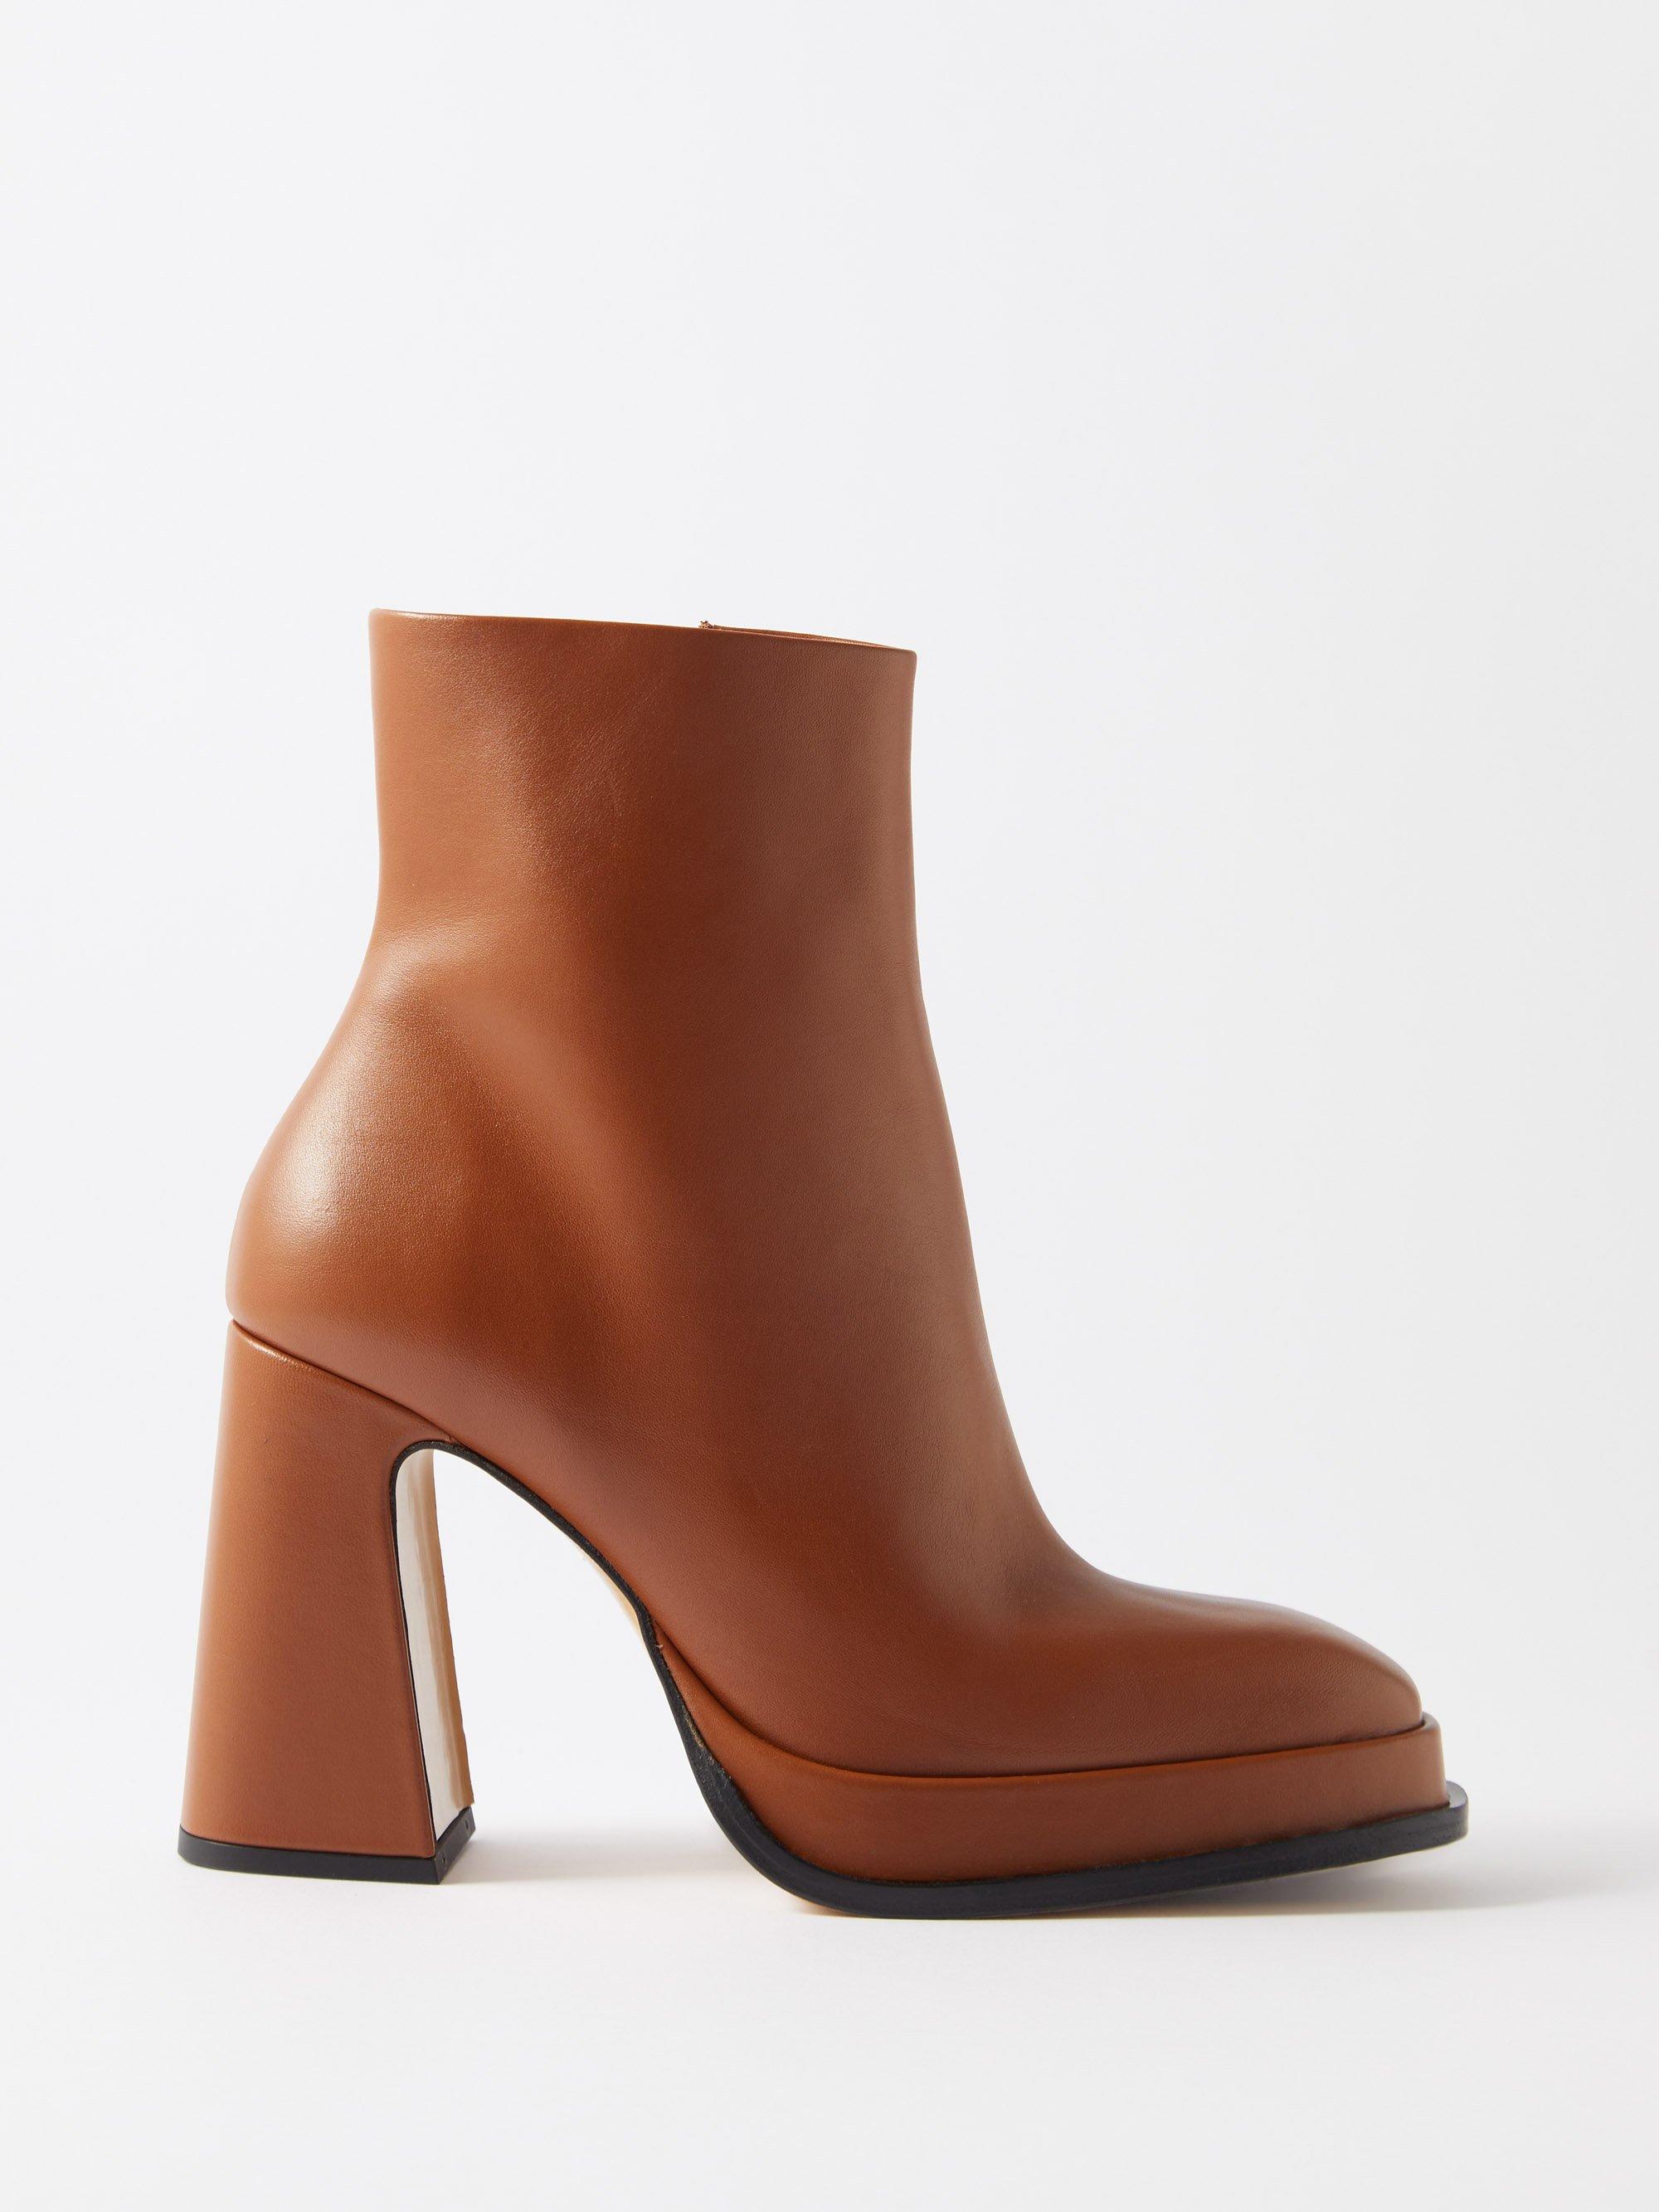 Souliers Martinez Chueca 90 Leather Platform Boots in Brown | Lyst